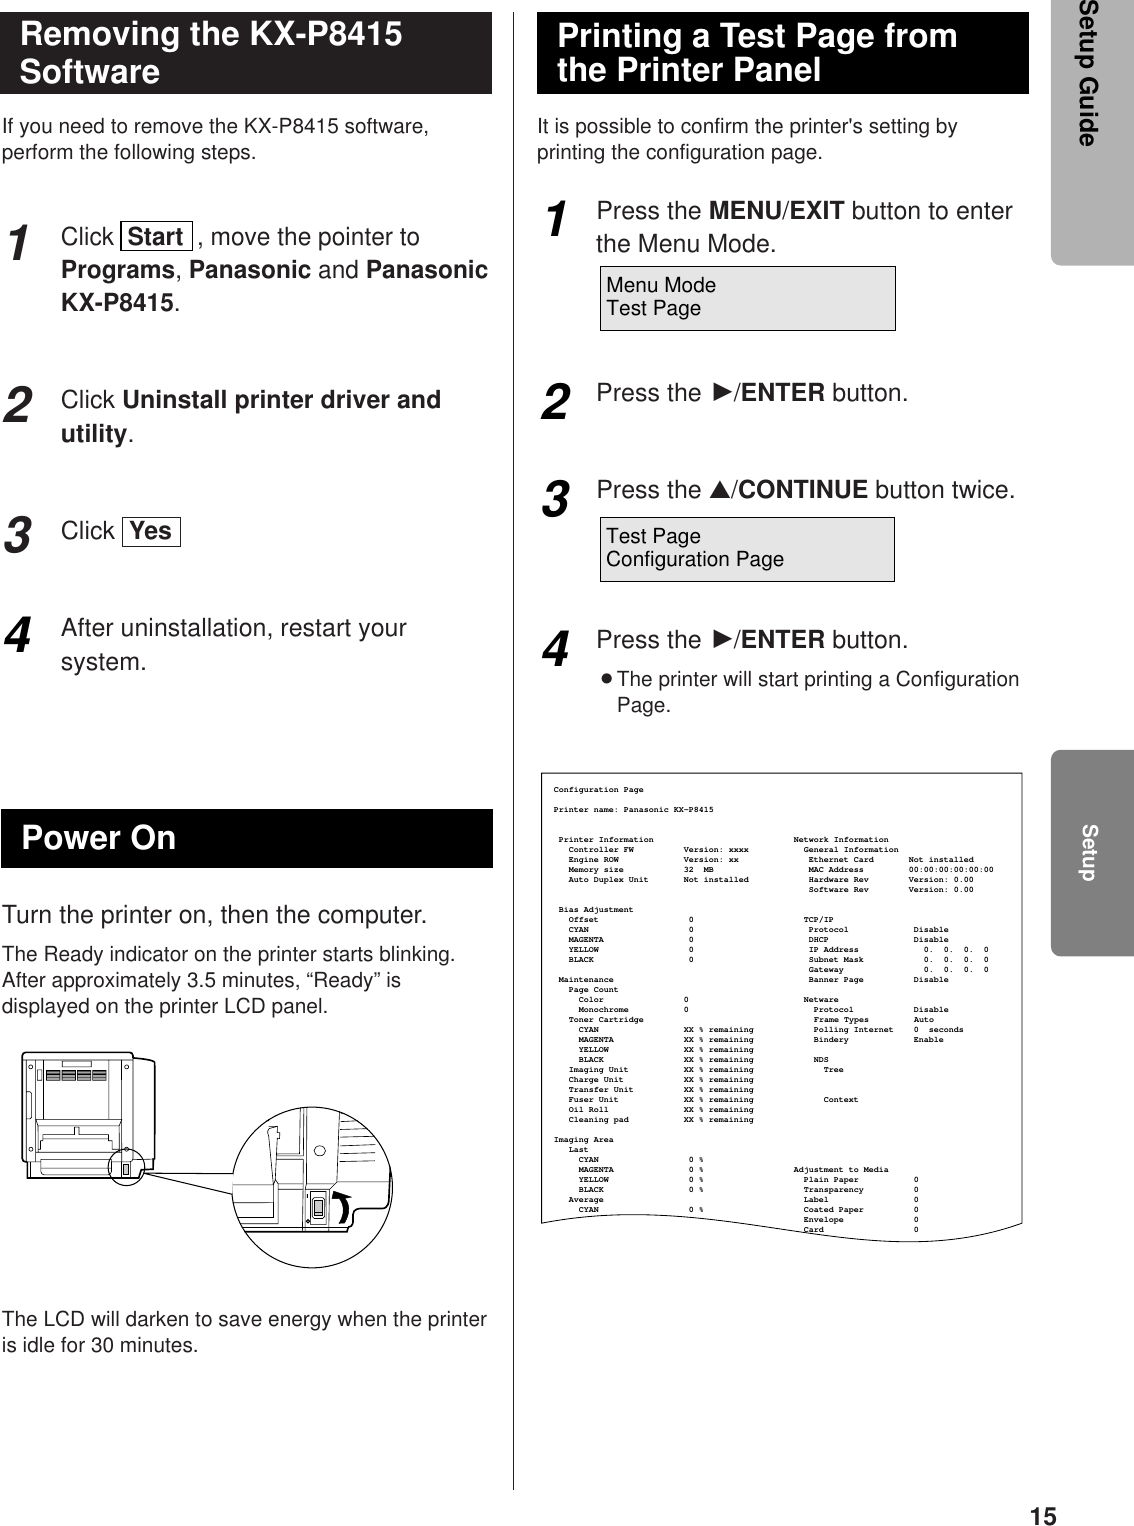 15If you need to remove the KX-P8415 software,perform the following steps.Click  Start  , move the pointer toPrograms, Panasonic and PanasonicKX-P8415.Click Uninstall printer driver andutility.Click  Yes After uninstallation, restart yoursystem.Turn the printer on, then the computer.The Ready indicator on the printer starts blinking.After approximately 3.5 minutes, “Ready” isdisplayed on the printer LCD panel.The LCD will darken to save energy when the printeris idle for 30 minutes.It is possible to confirm the printer&apos;s setting byprinting the configuration page.Press the MENU/EXIT button to enterthe Menu Mode.Press the H/ENTER button.Press the ▲/CONTINUE button twice.Press the H/ENTER button.BThe printer will start printing a ConfigurationPage.123Removing the KX-P8415SoftwarePower OnPrinting a Test Page fromthe Printer Panel1234Configuration PagePrinter name: Panasonic KX-P8415Printer Information                            Network Information   Controller FW        Version: xxxx           General Information     Engine ROW             Version: xx              Ethernet Card       Not installed   Memory size            32  MB                   MAC Address         00:00:00:00:00:00   Auto Duplex Unit       Not installed            Hardware Rev        Version: 0.00                                                   Software Rev        Version: 0.00 Bias Adjustment   Offset                  0                      TCP/IP          CYAN                    0                       Protocol             Disable   MAGENTA                 0                       DHCP                 Disable   YELLOW                  0                       IP Address             0.  0.  0.  0     BLACK                   0                       Subnet Mask            0.  0.  0.  0                                                    Gateway                0.  0.  0.  0  Maintenance                                       Banner Page          Disable   Page Count     Color                0                       Netware     Monochrome           0                         Protocol            Disable   Toner Cartridge     CYAN                 XX % remaining            Polling Internet    0  seconds     MAGENTA              XX % remaining            Bindery             Enable     YELLOW               XX % remaining     BLACK                XX % remaining            NDS   Imaging Unit           XX % remaining              Tree   Charge Unit            XX % remaining   Transfer Unit          XX % remaining   Fuser Unit             XX % remaining              Context   Oil Roll               XX % remaining   Cleaning pad           XX % remainingImaging Area   Last     CYAN                  0 %     MAGENTA               0 %                  Adjustment to Media     YELLOW                0 %                    Plain Paper           0     BLACK                 0 %                    Transparency          0   Average                                        Label                 0     CYAN                  0 %                    Coated Paper          0                                                  Envelope              0                                                  Card                  0  Frame Types         AutoMenu ModeTest PageTest PageConfiguration PageSetupSetup Guide4